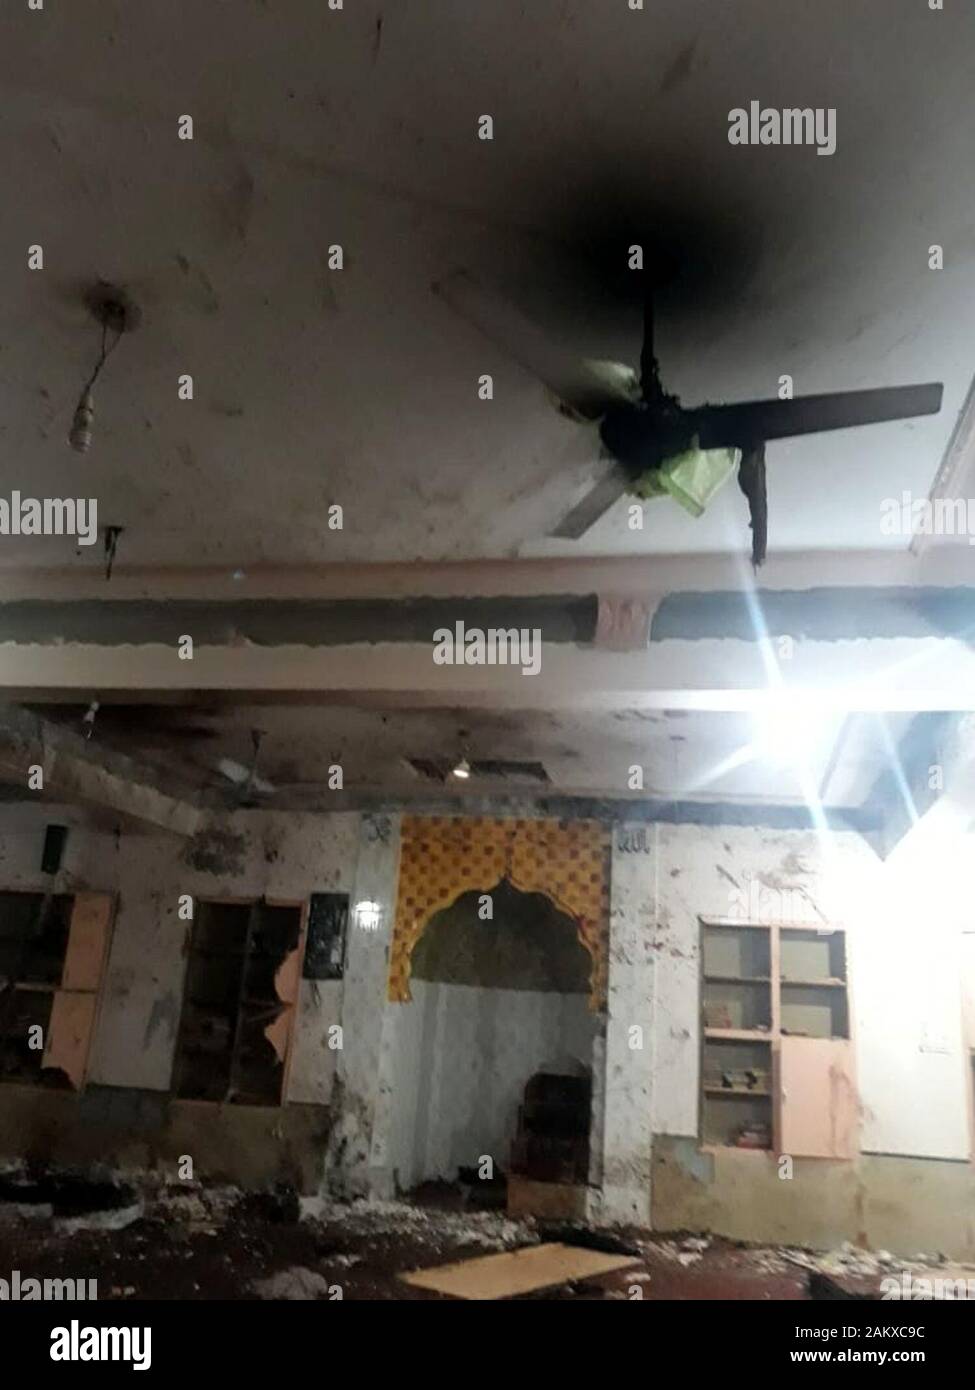 Quetta, Pakistan. 10th Jan 2020. Photo taken on Jan. 10, 2020 shows the damage inside a mosque following a blast in Quetta, Balochistan province, Pakistan. A blast hit a mosque in Quetta on Friday night, killing at least 14 people and injuring 20 others, a senior police officer said. (Str/Xinhua) Credit: Xinhua/Alamy Live News Stock Photo